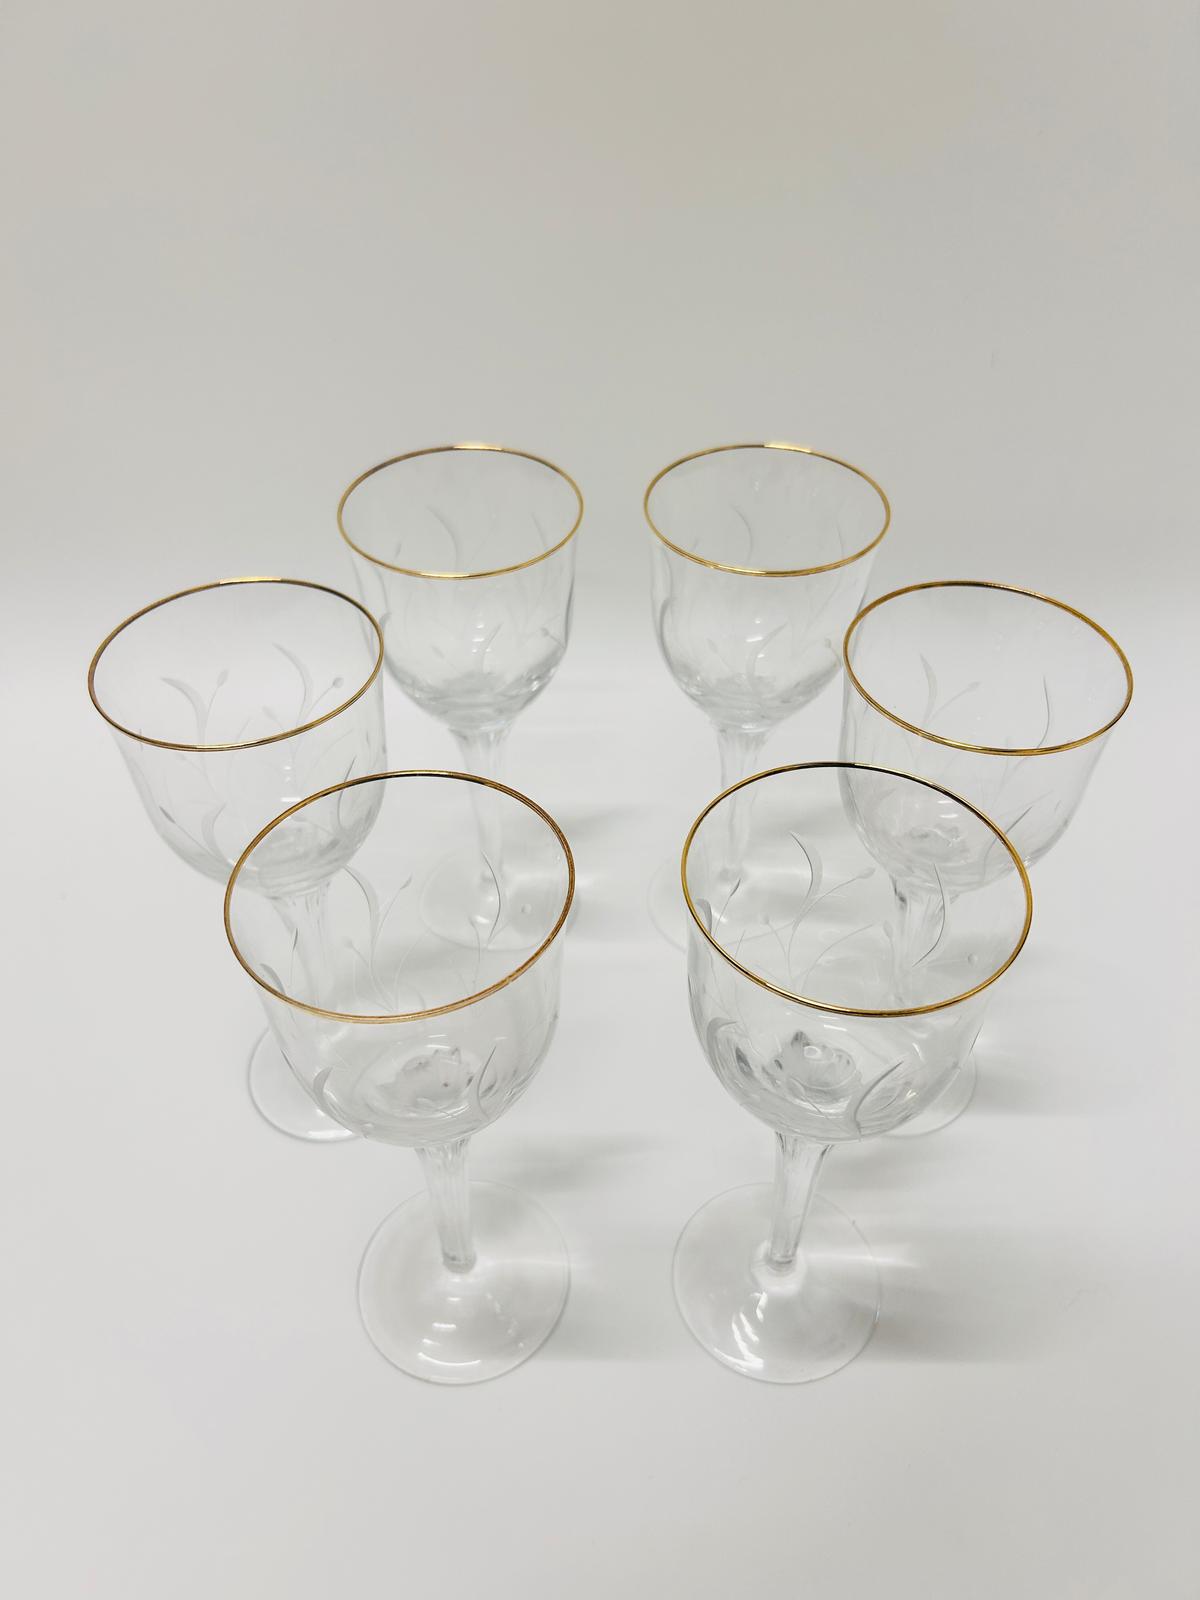 6 Waterford Crystal Melodia wine glasses 7 1/2 in H